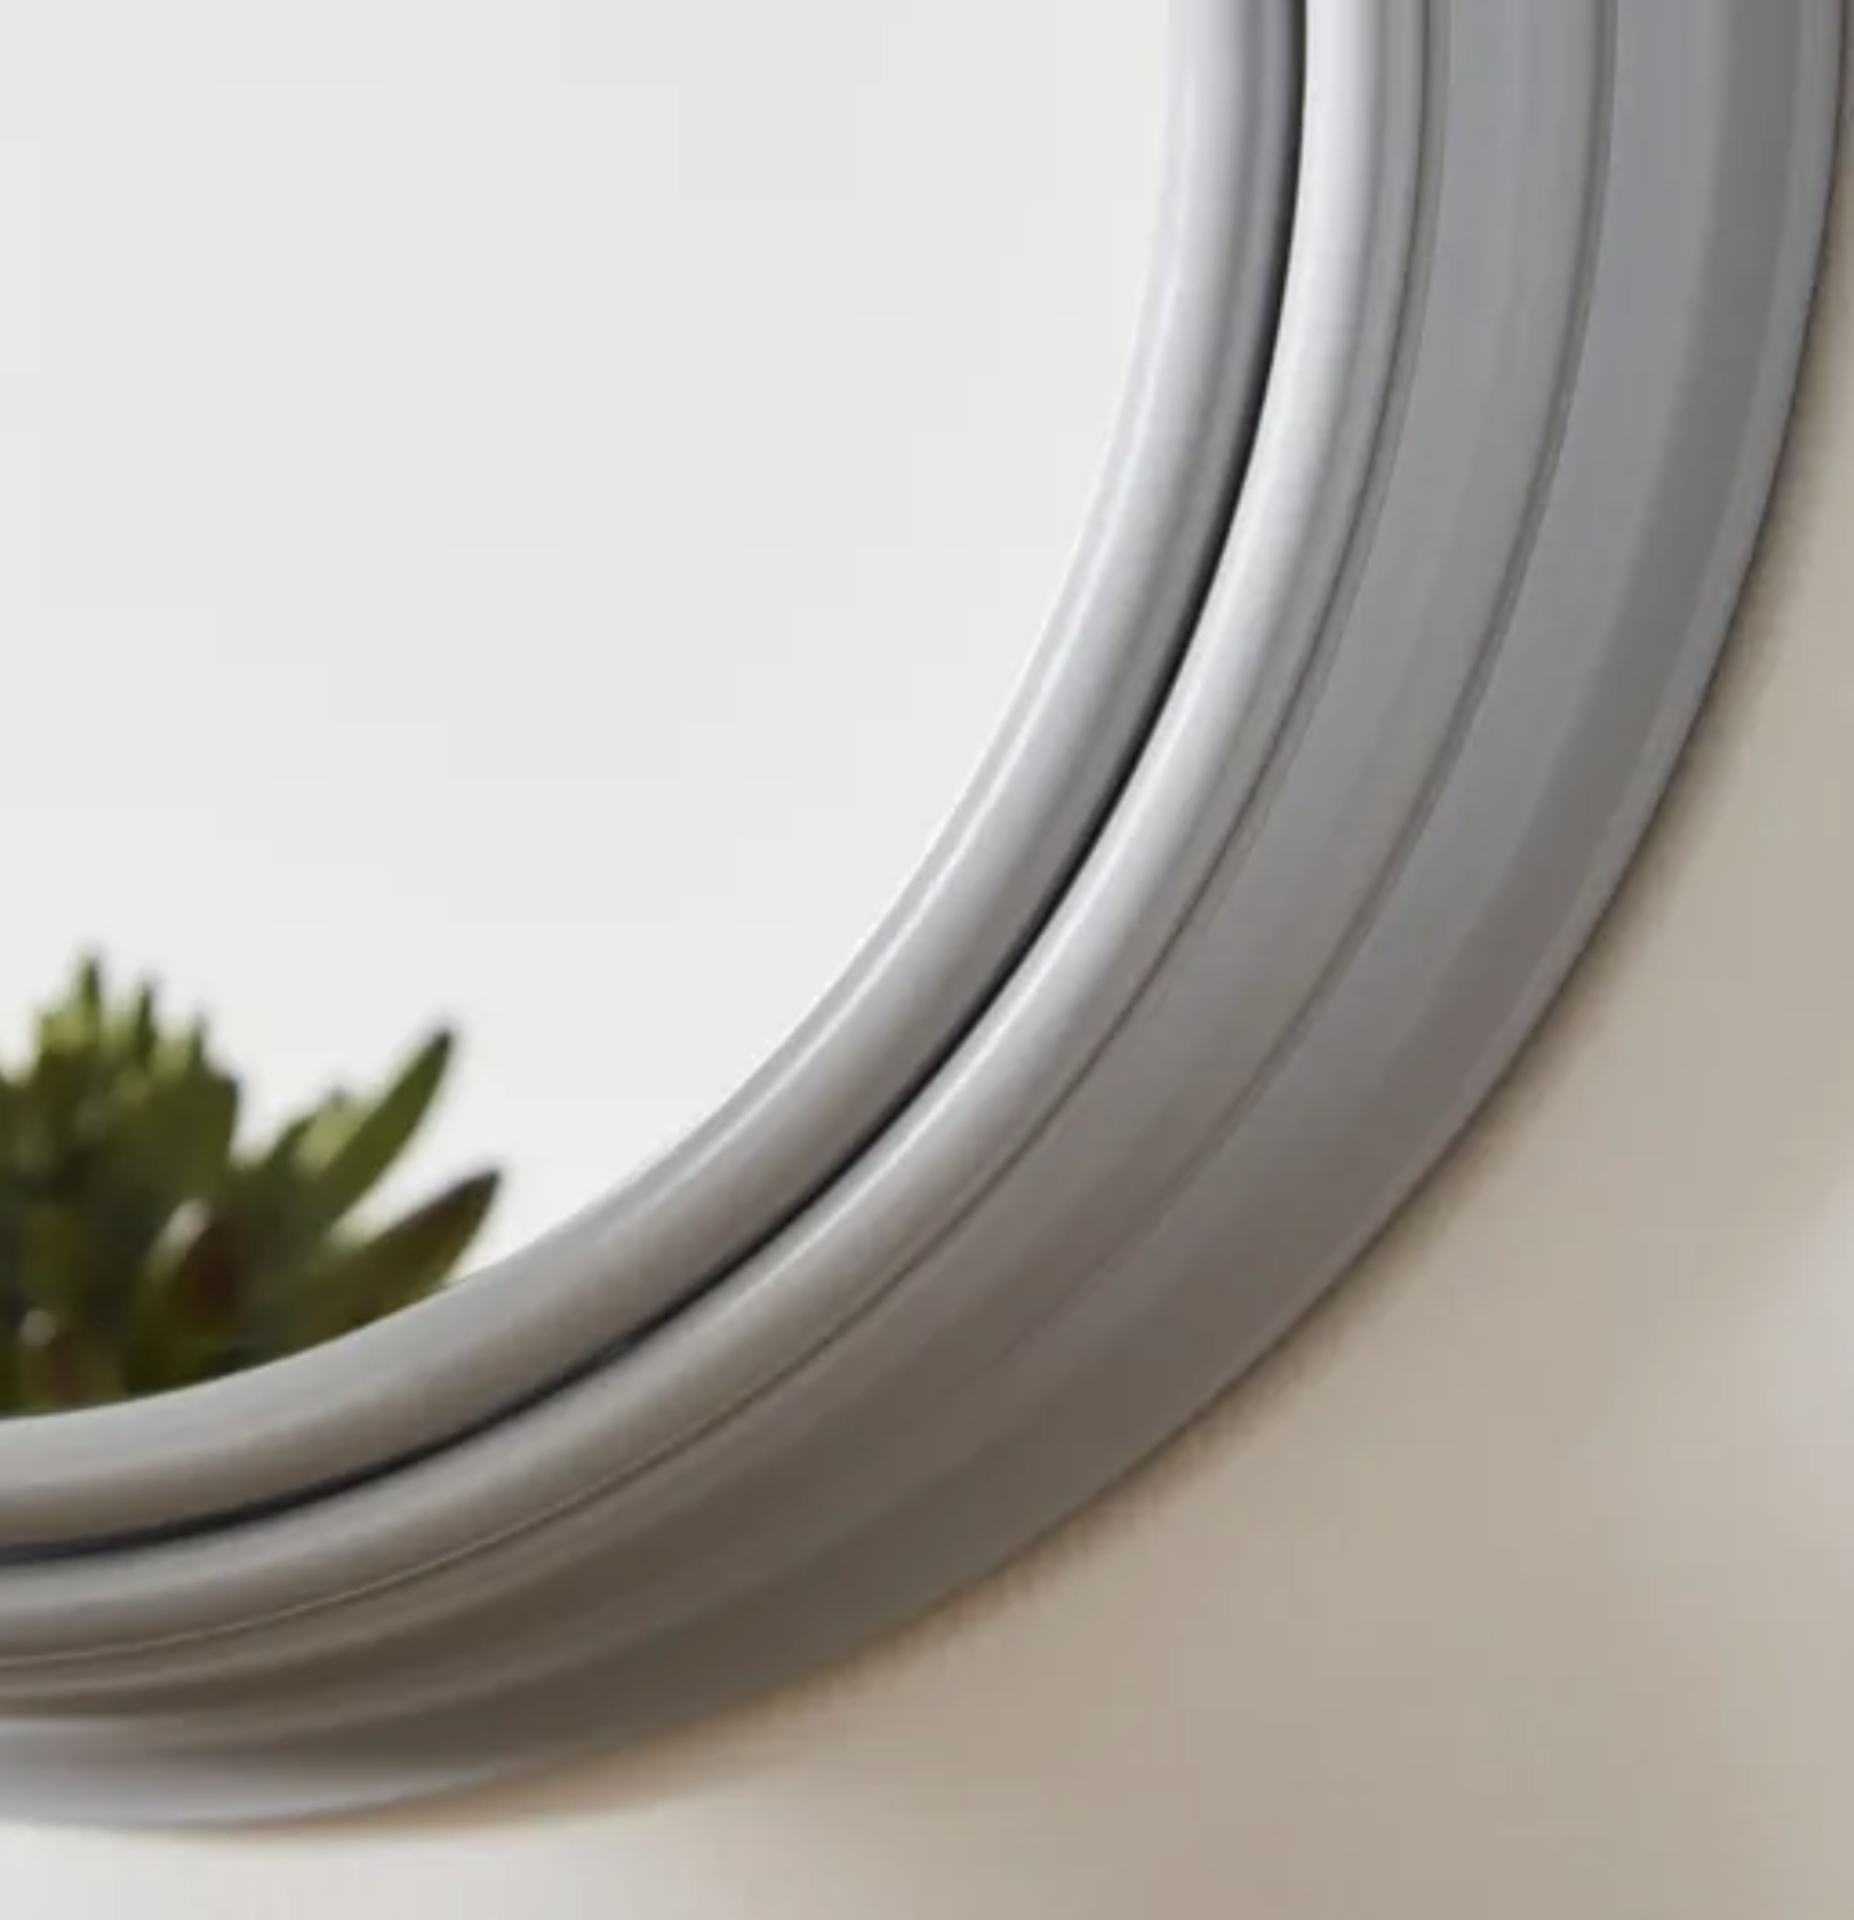 Silver Round 30cm Mirror - Brand New - A contemporary and timeless circular mirror - Image 2 of 3